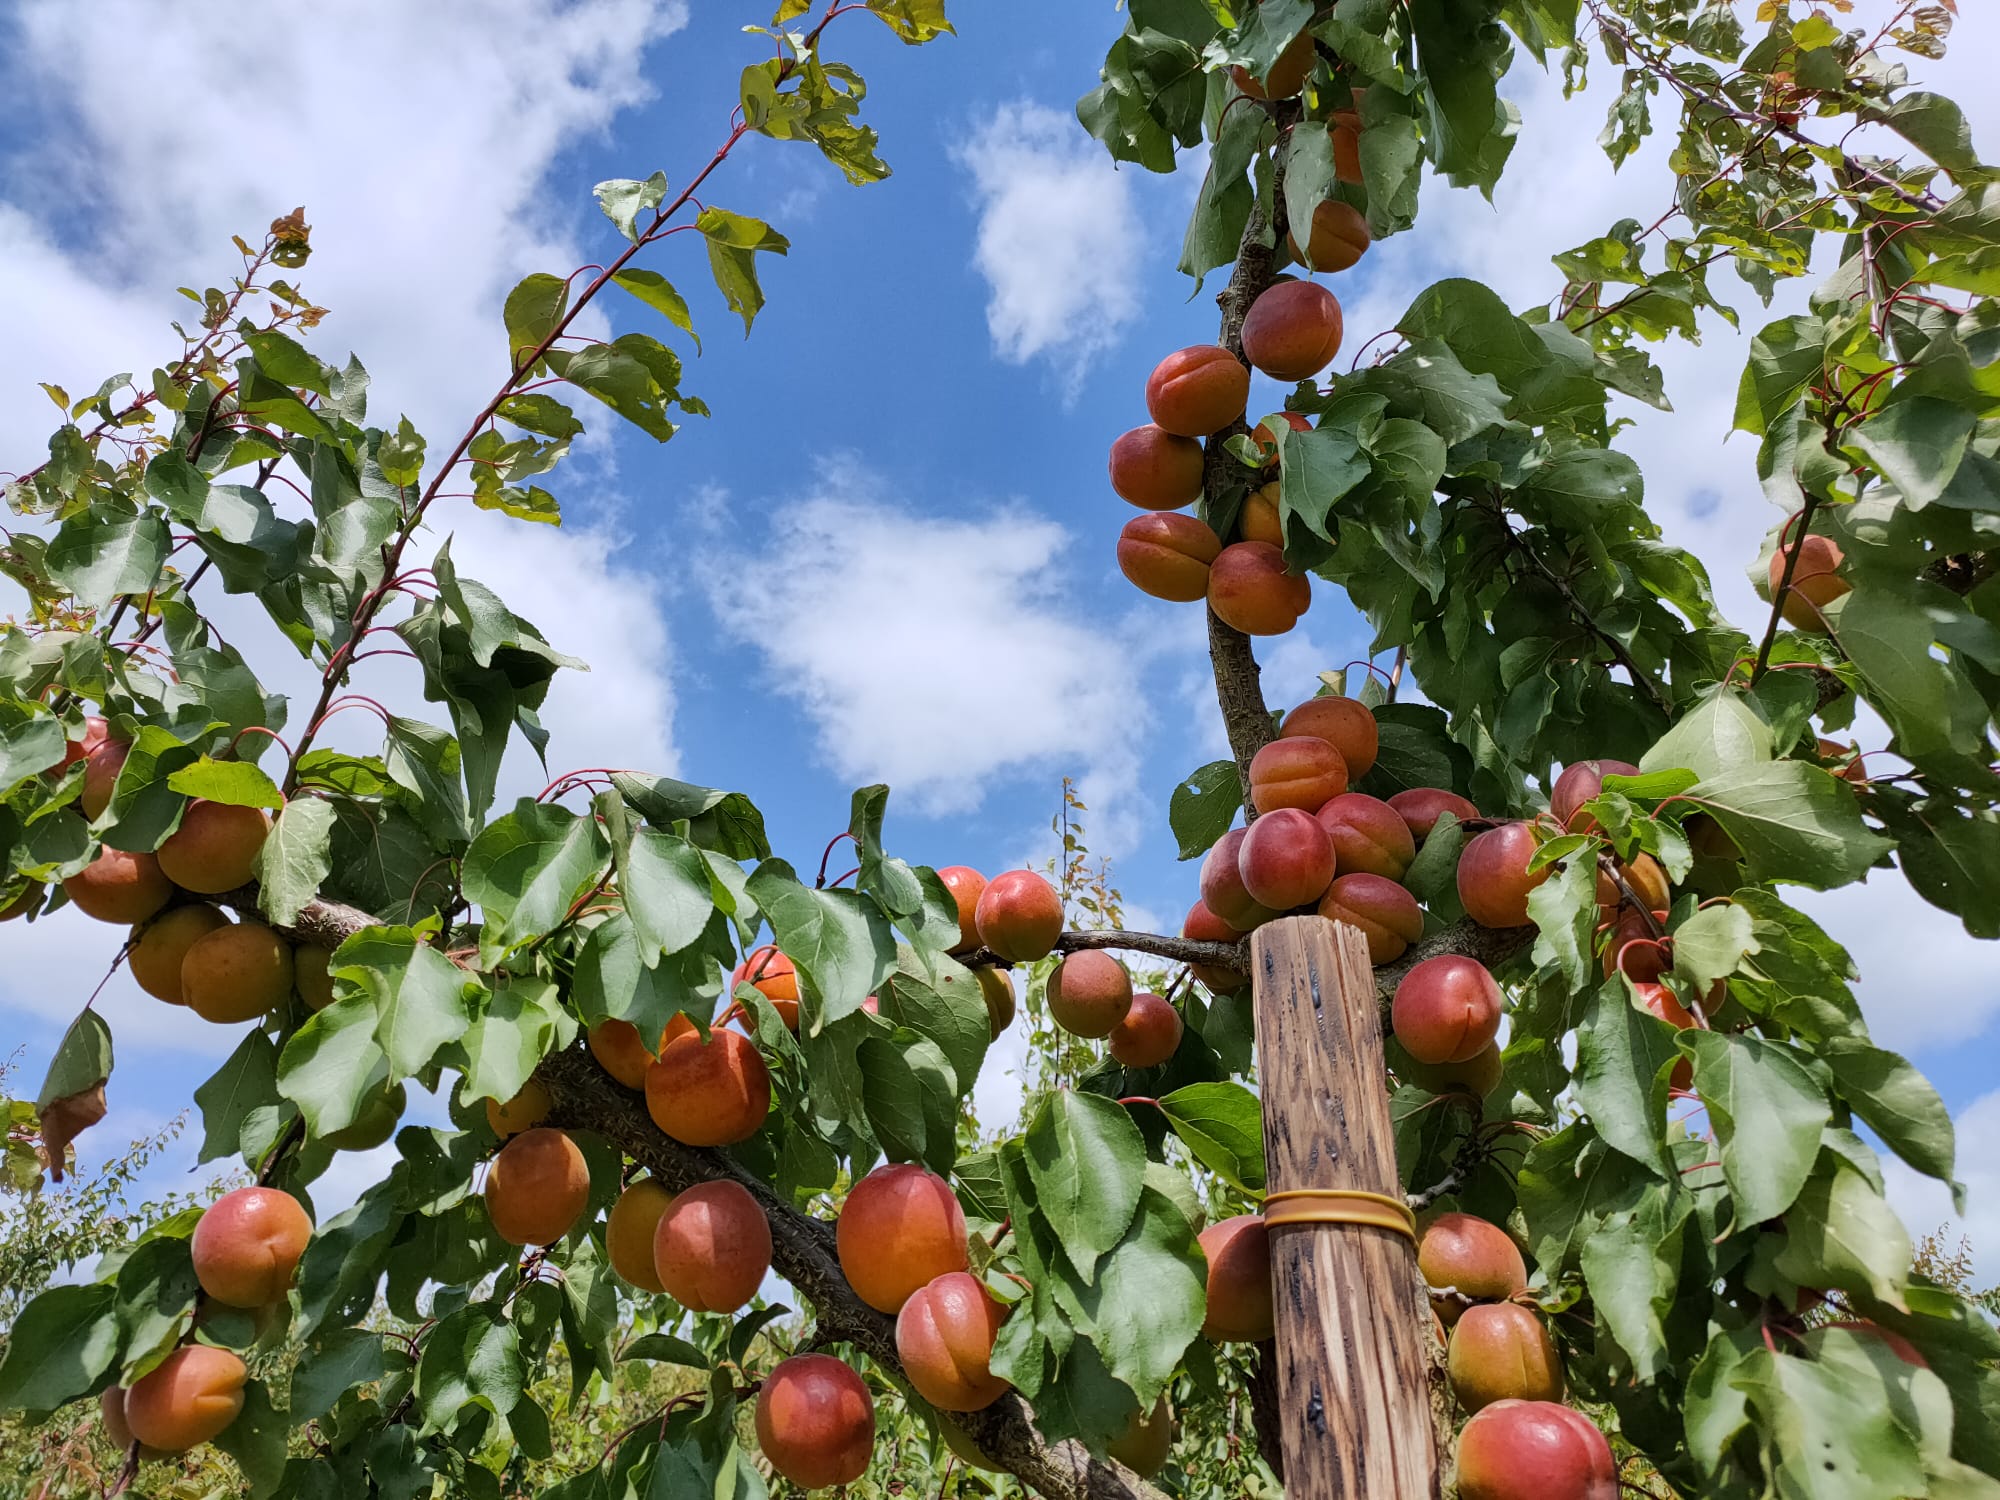 David Moore, owner of Home Farm, near Maidstone, is now the UK’s biggest grower of English apricots. The British apricot industry is celebrating a bumper crop 10 years on despite agronomists uncertain the fruit would grow in the British climate